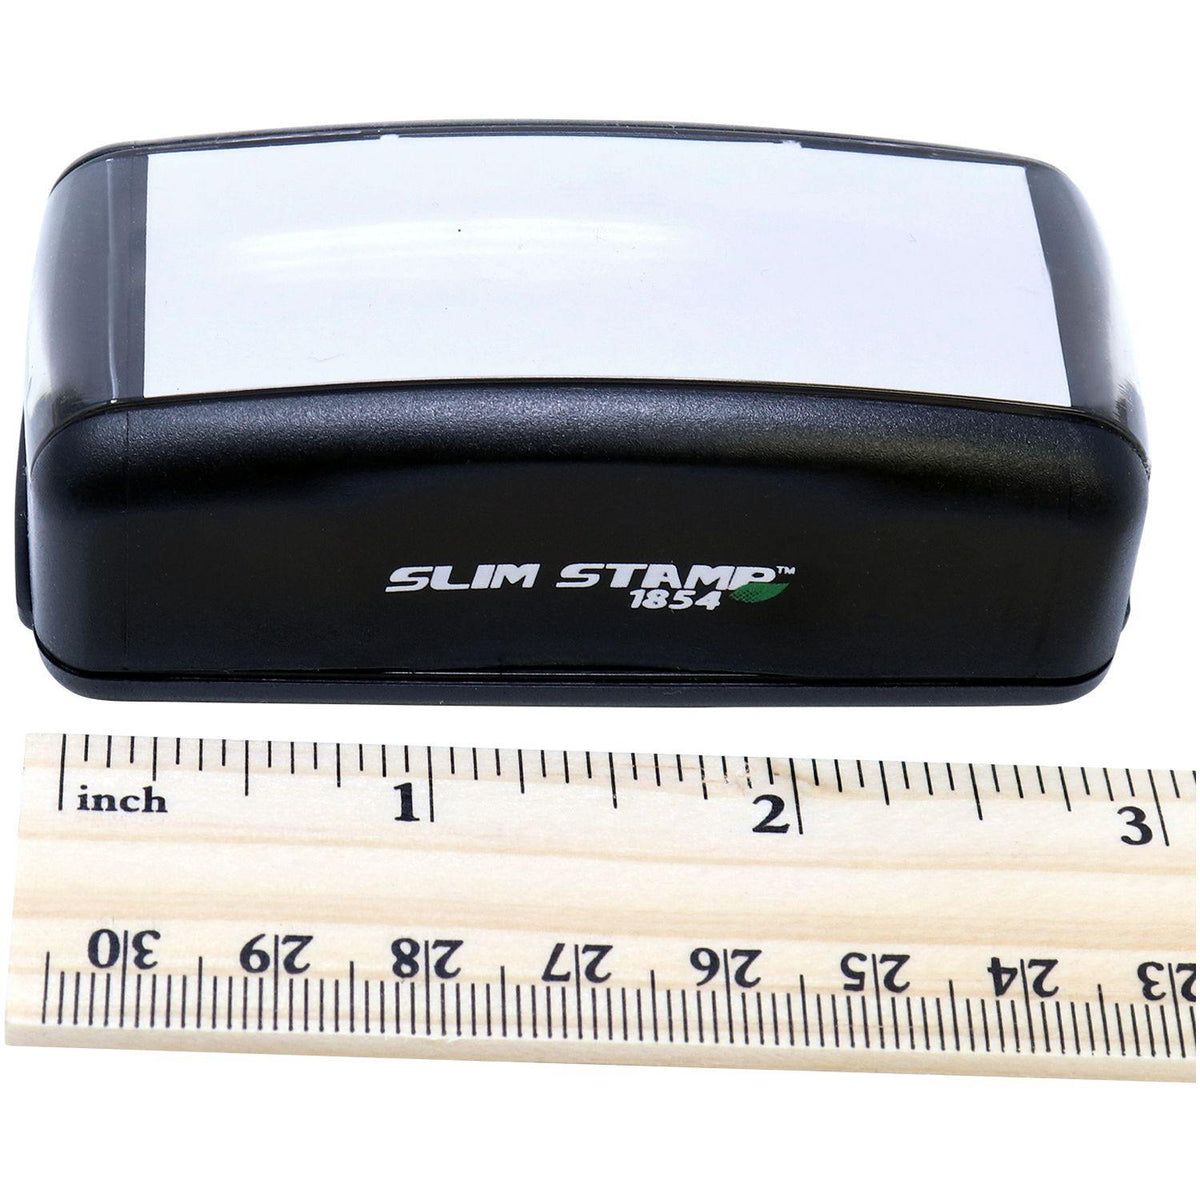 Measurement Large Pre-Inked Bold File Stamp with Ruler